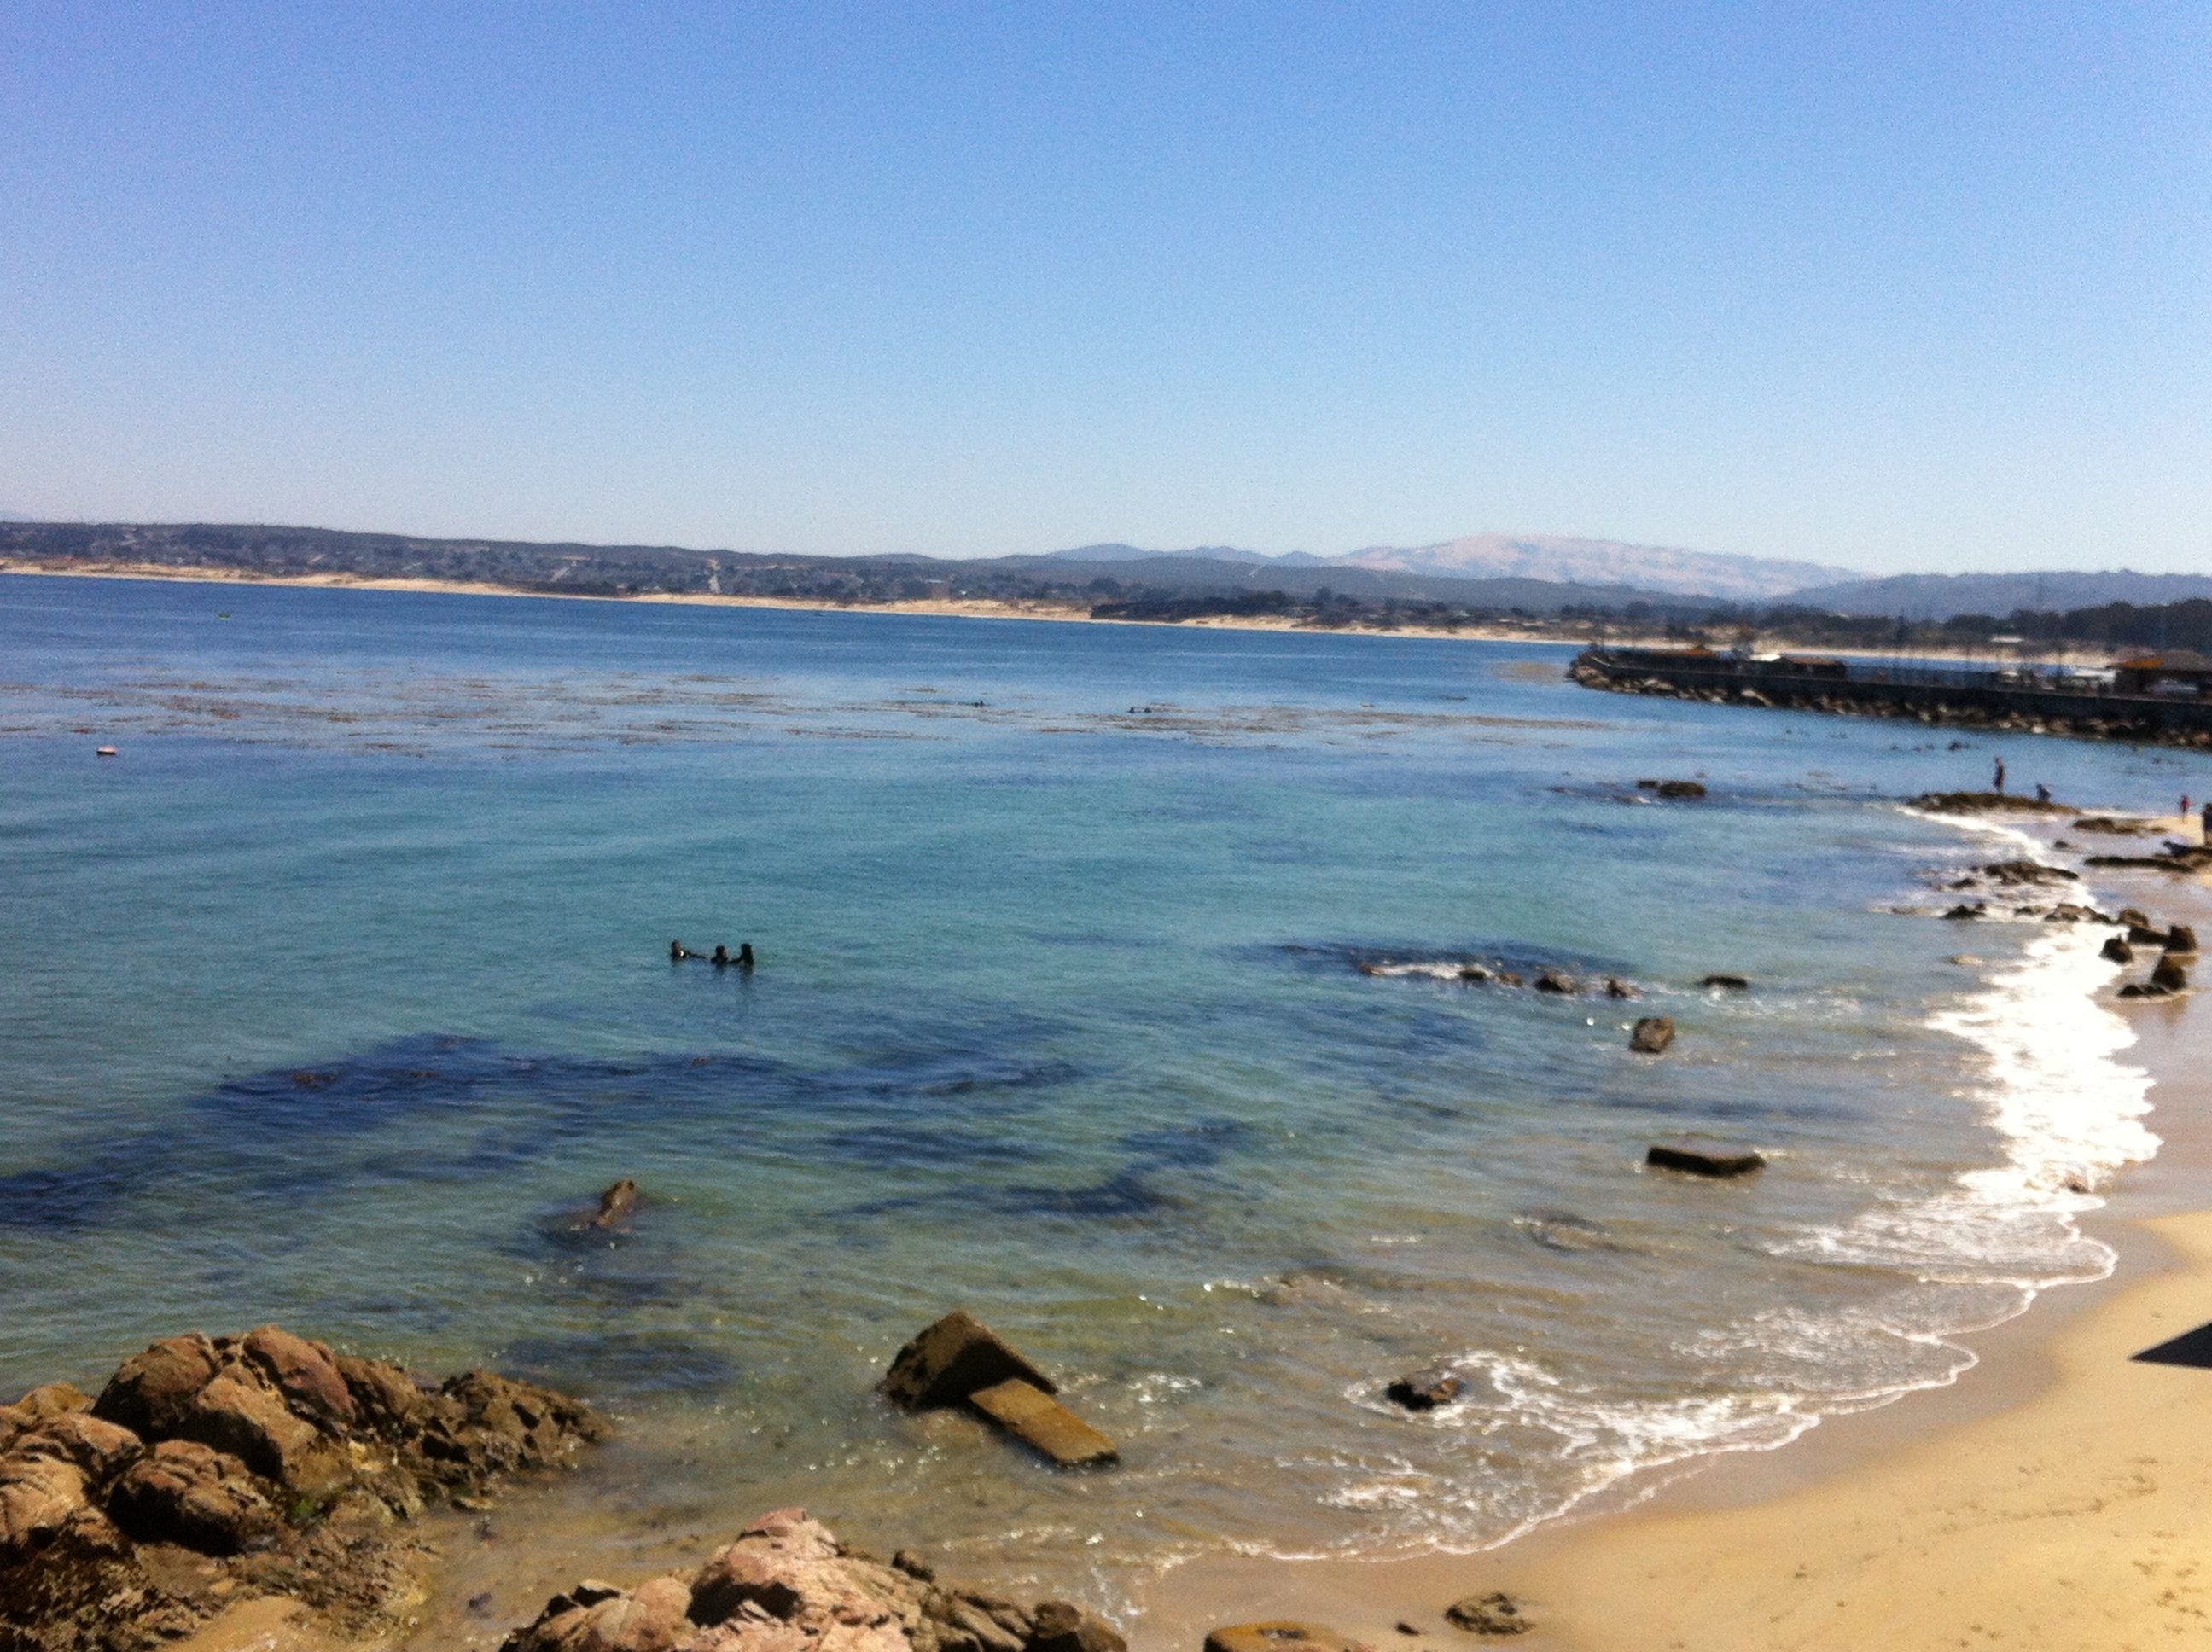 Breakwater Cove dive spot in Monterey where DUI had set up their Demo Day. Photo by: Pamela Neeb Wade